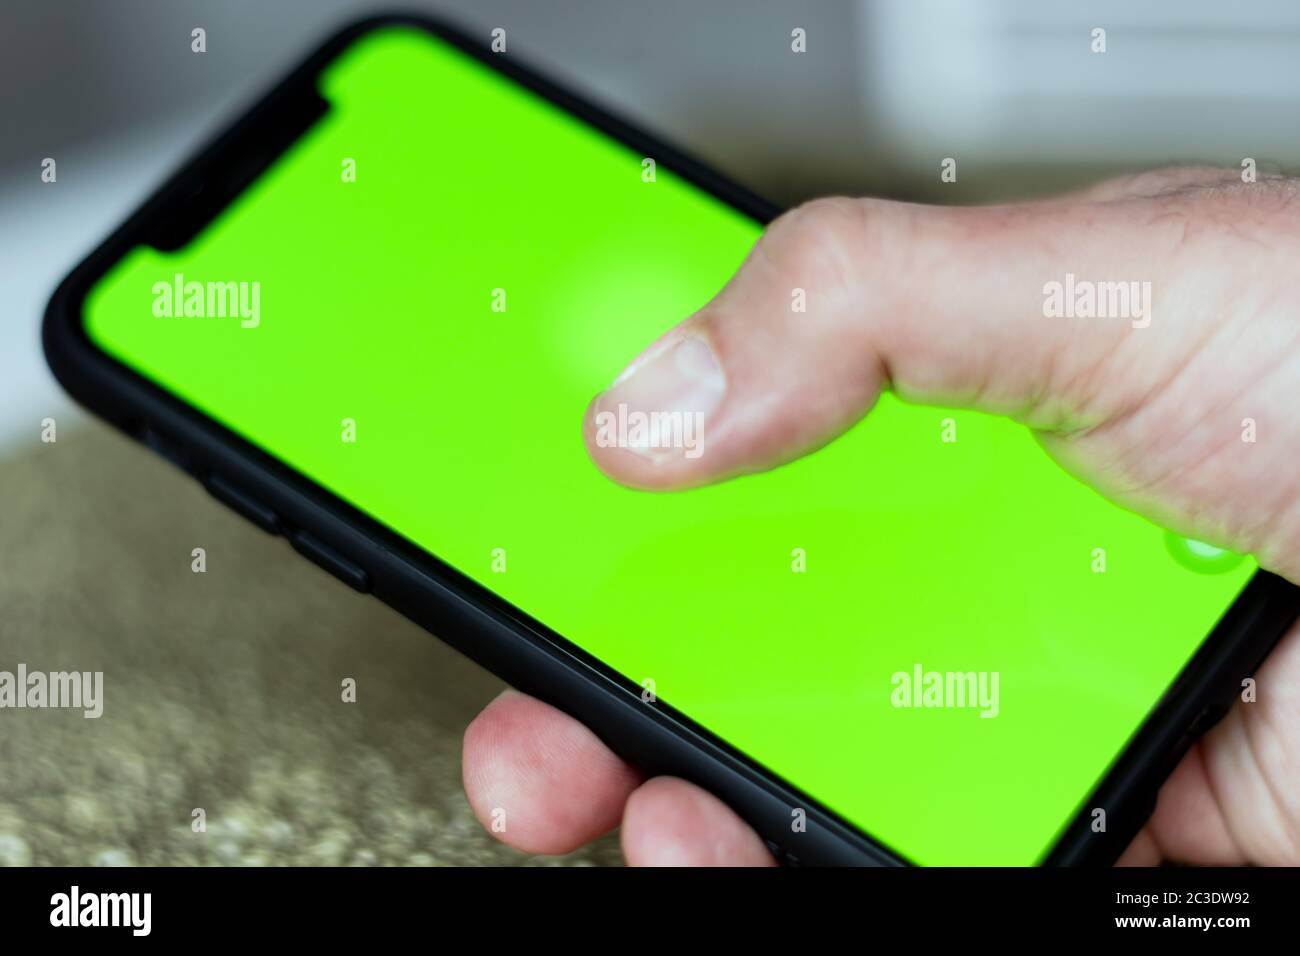 the thumb of a male hand while touching the green screen of a mobile phone. Stock Photo